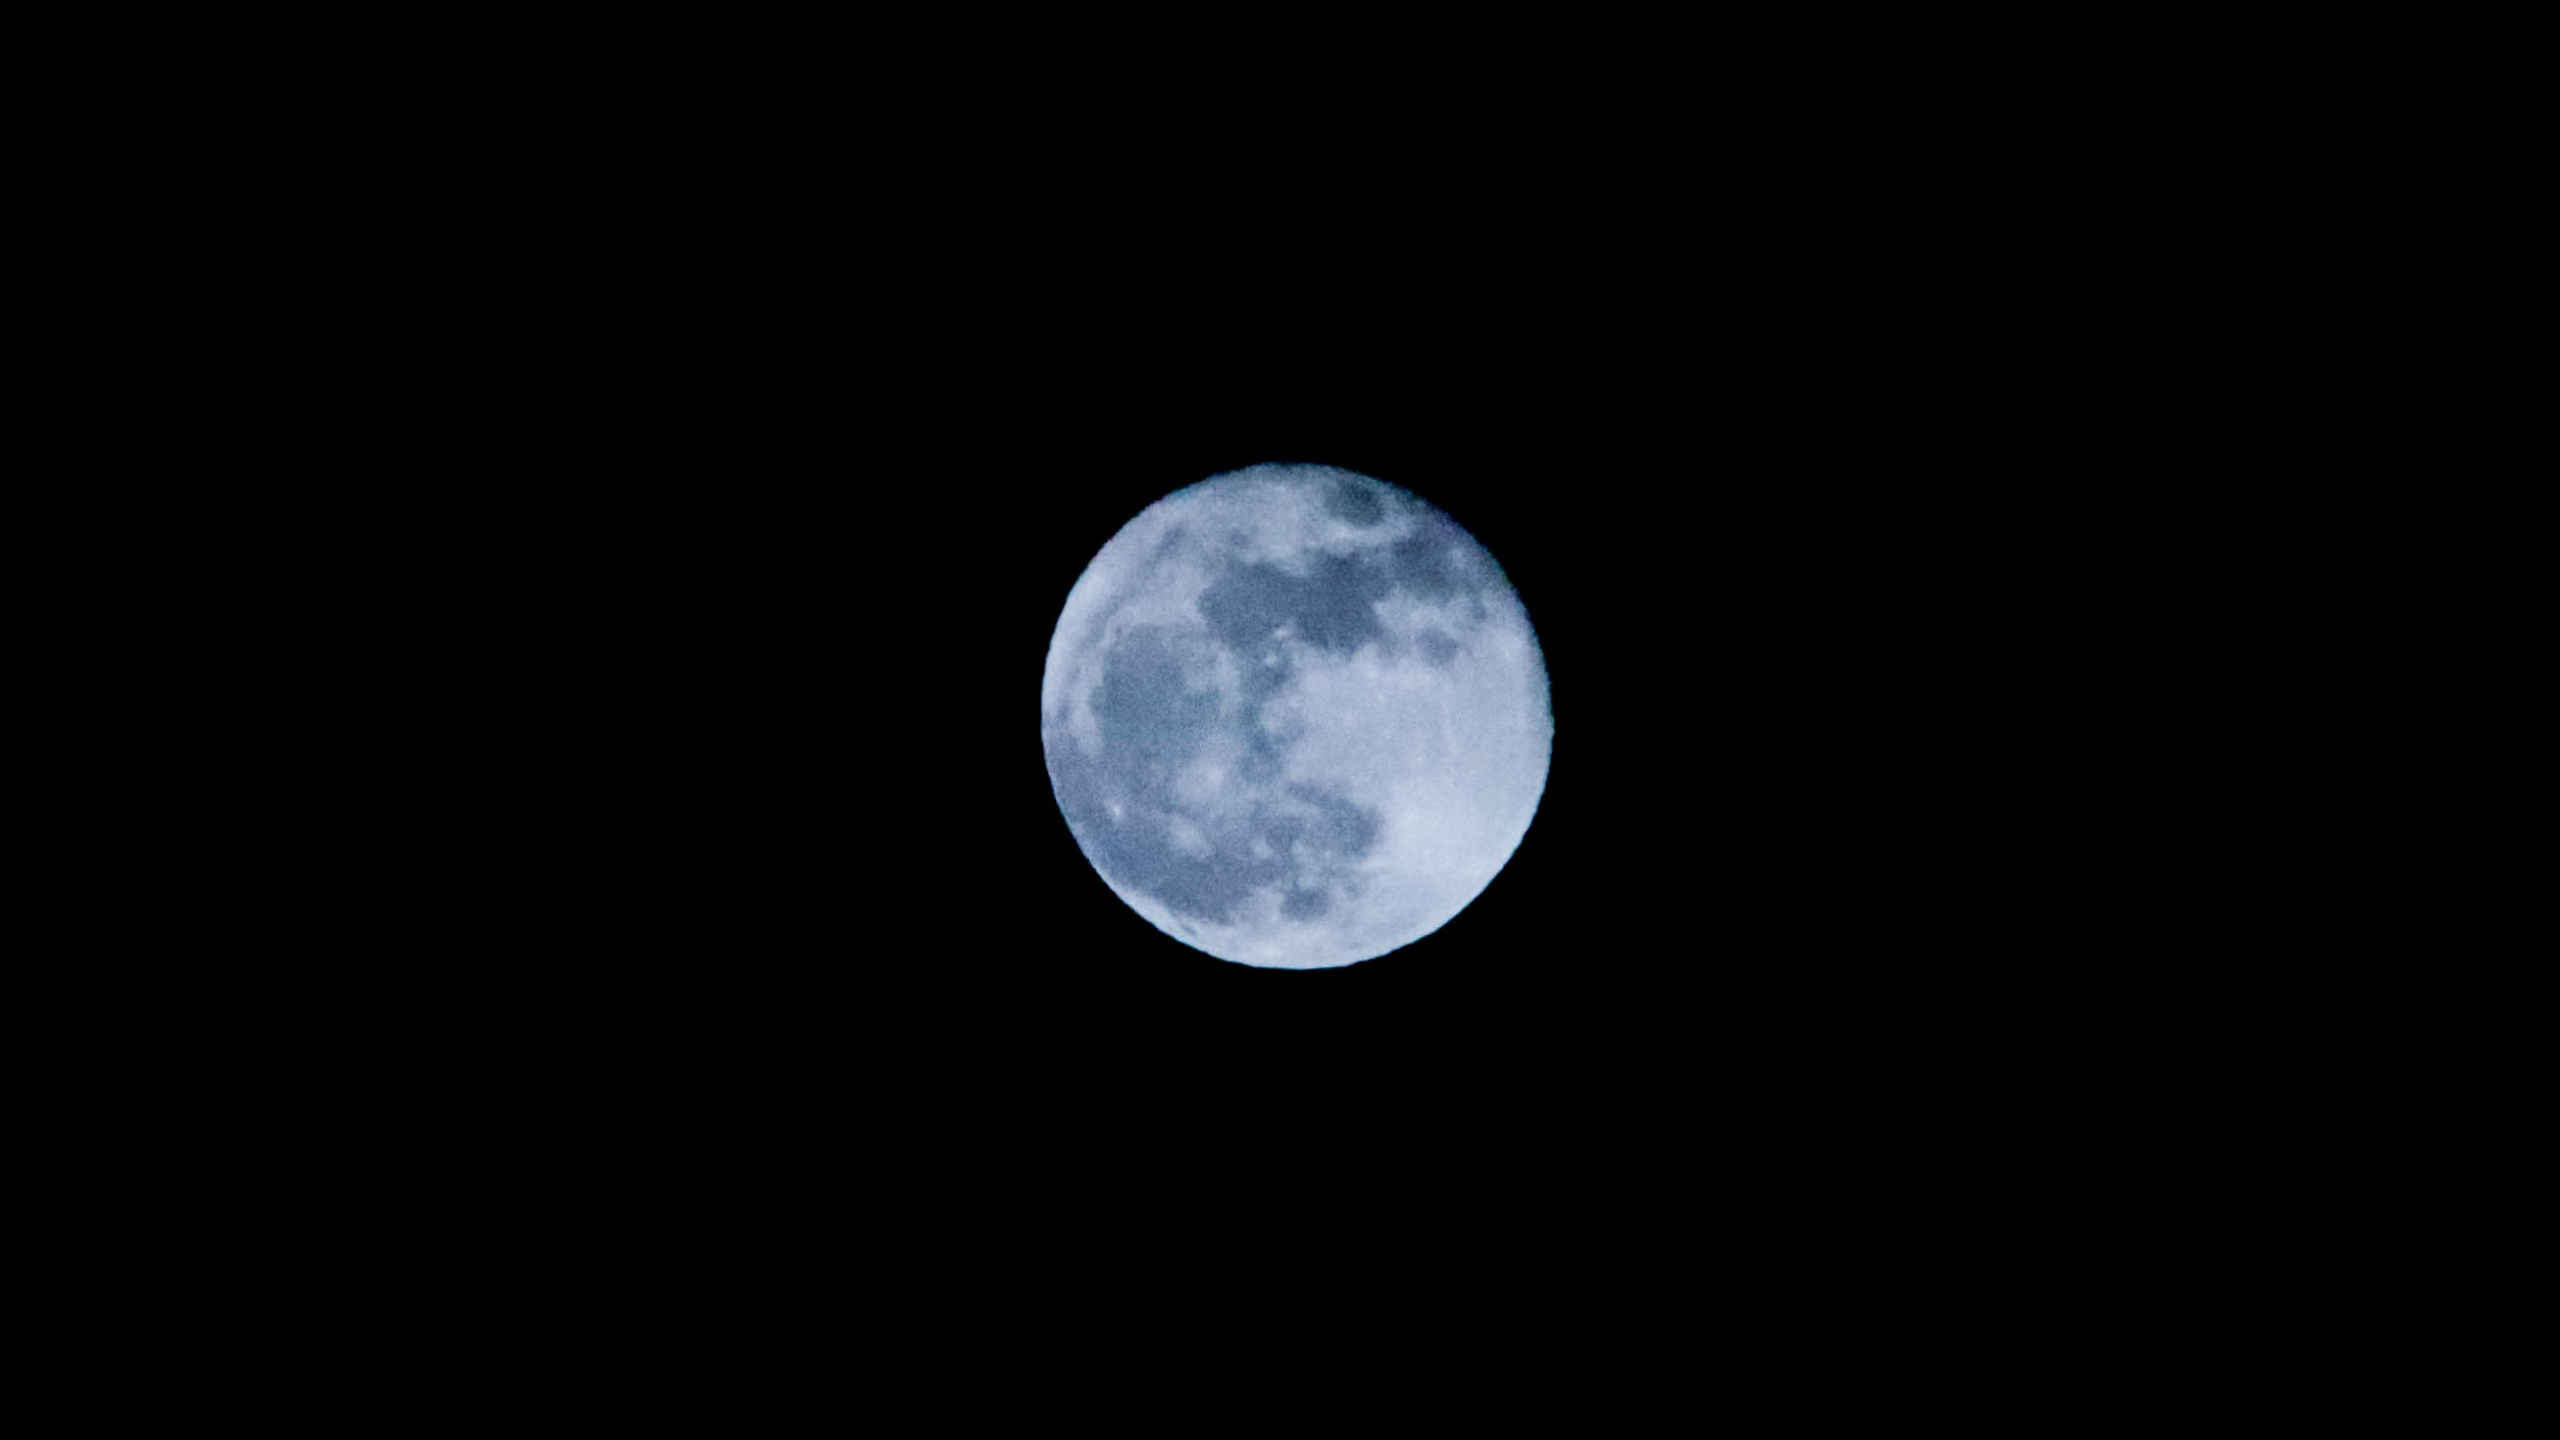 Full Moon in The Sky. Wallpaper in 2560x1440 Resolution